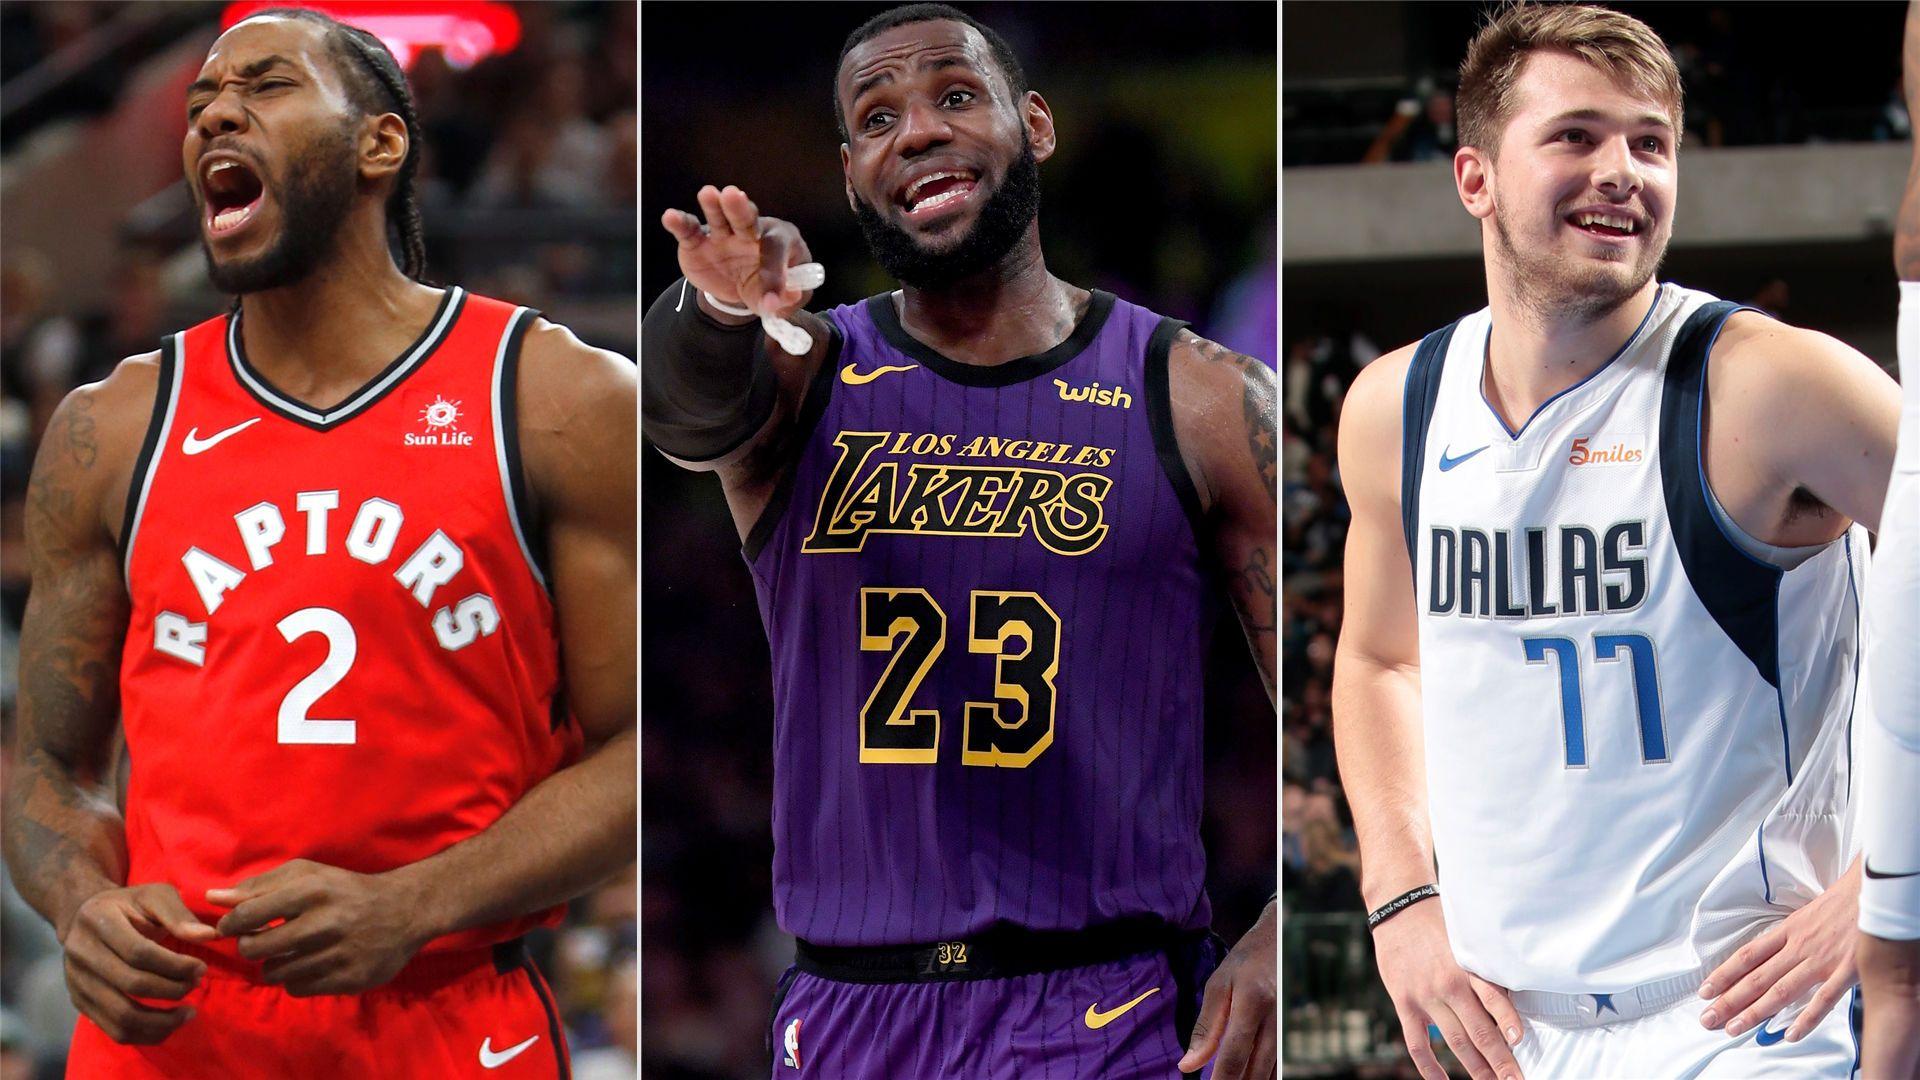 NBA All Star Game 2019: Takeaways From The Second Fan Vote Results